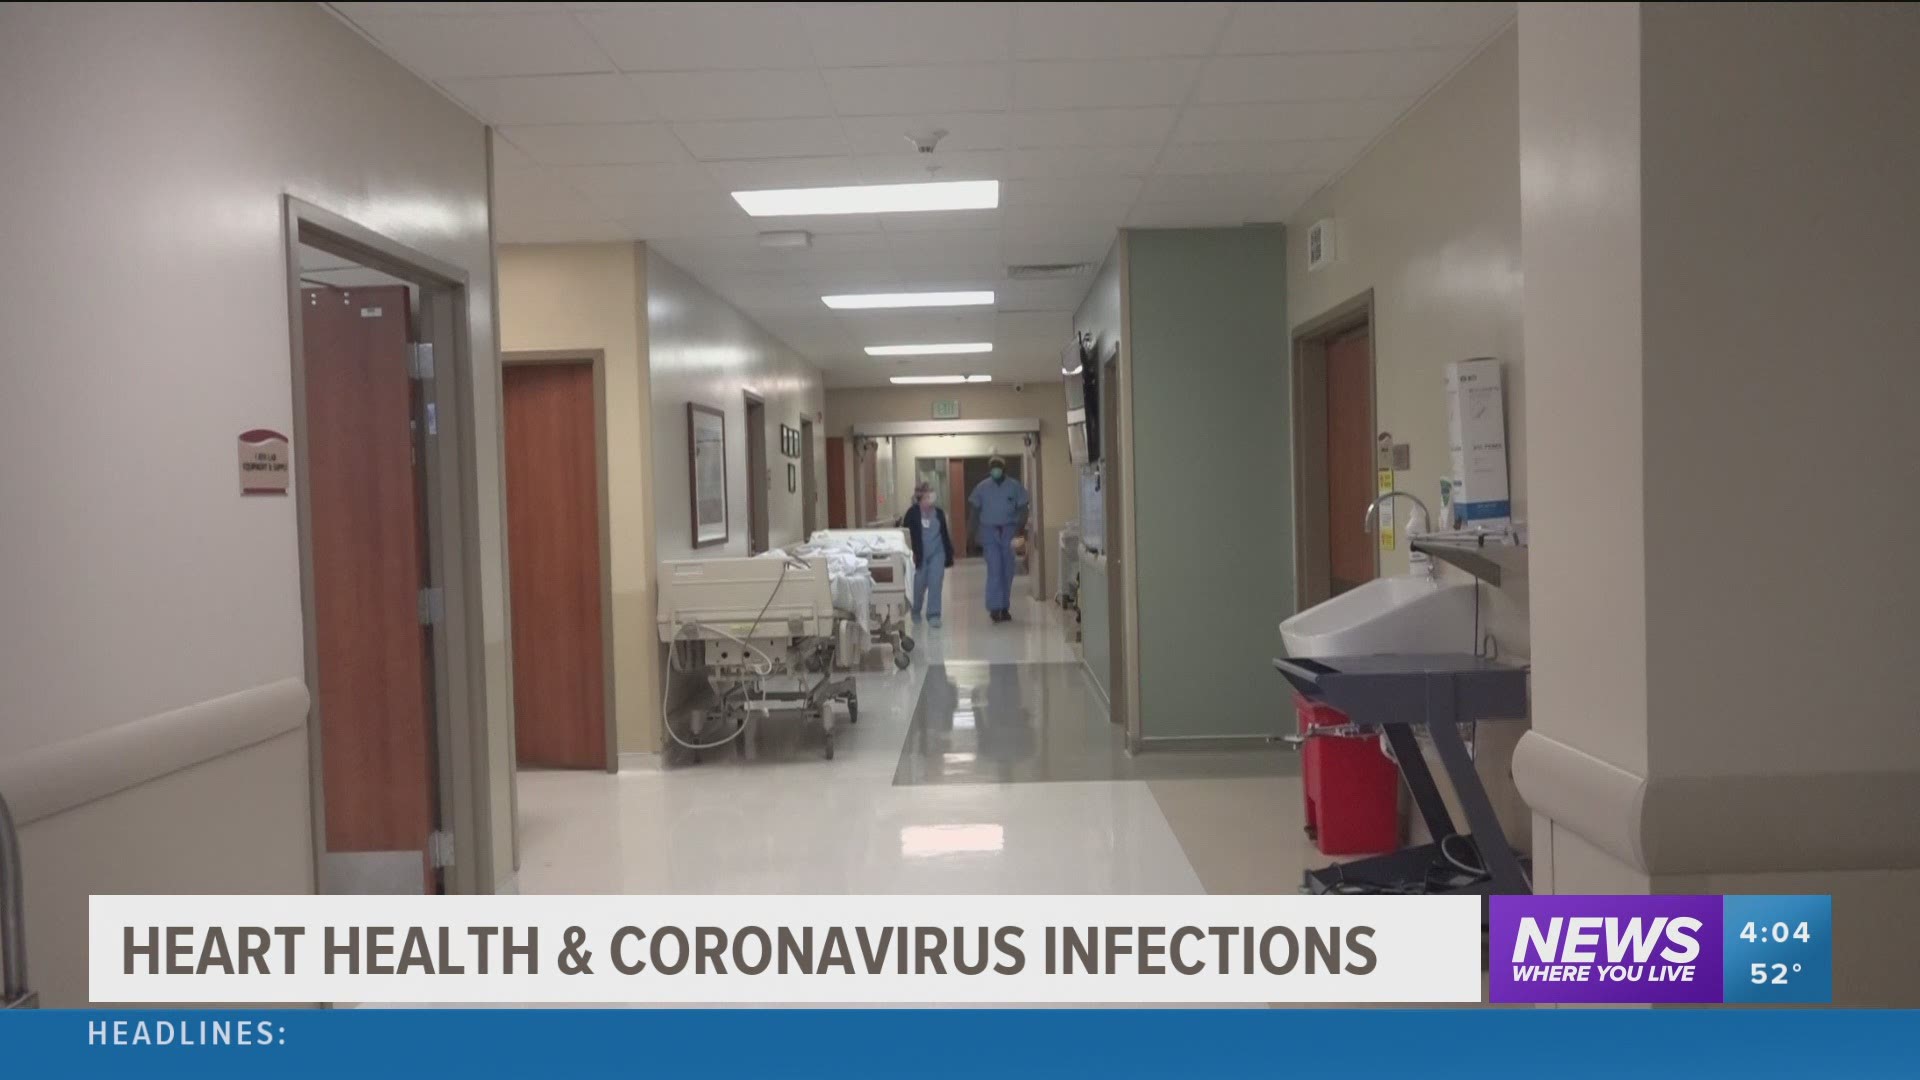 Whether you have a history of heart problems or not, cardiologists at Baptist Health say they are seeing some complications in COVID-19 survivors.